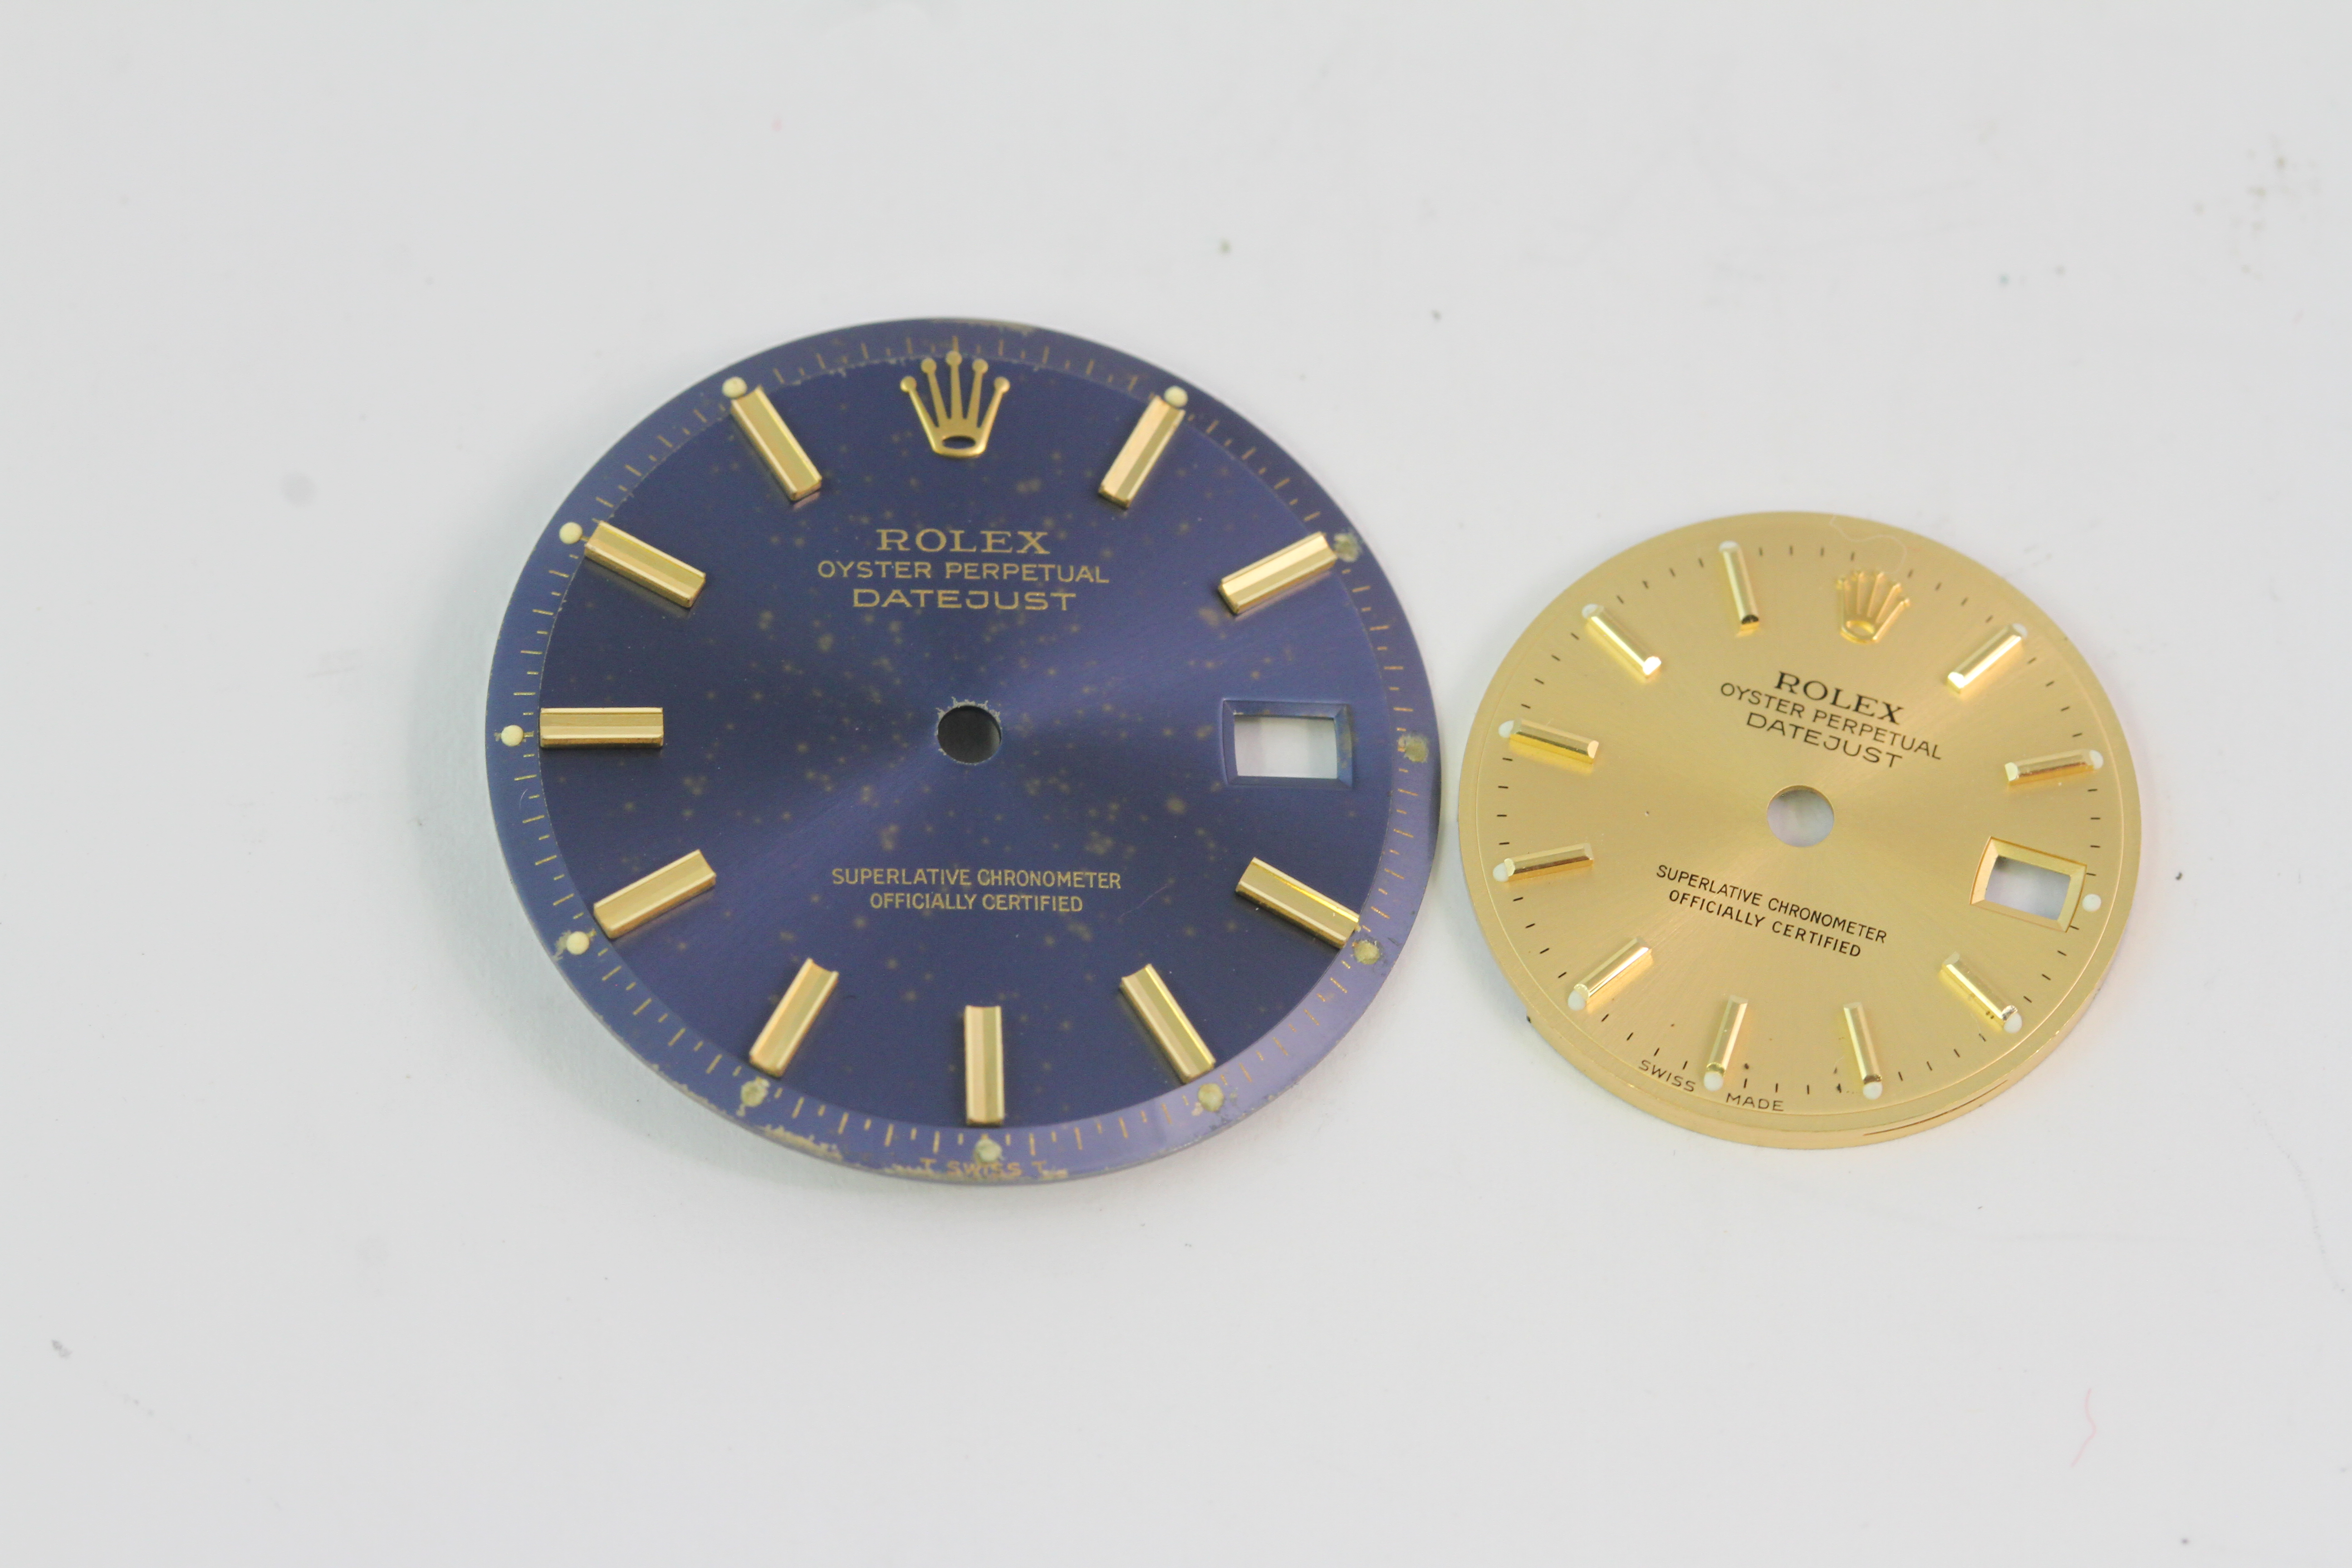 ROLEX SUNBURST BLUE DIAL FOR DATEJUST WITH LADIES DATEJUST CHAMPAGNE DIAL